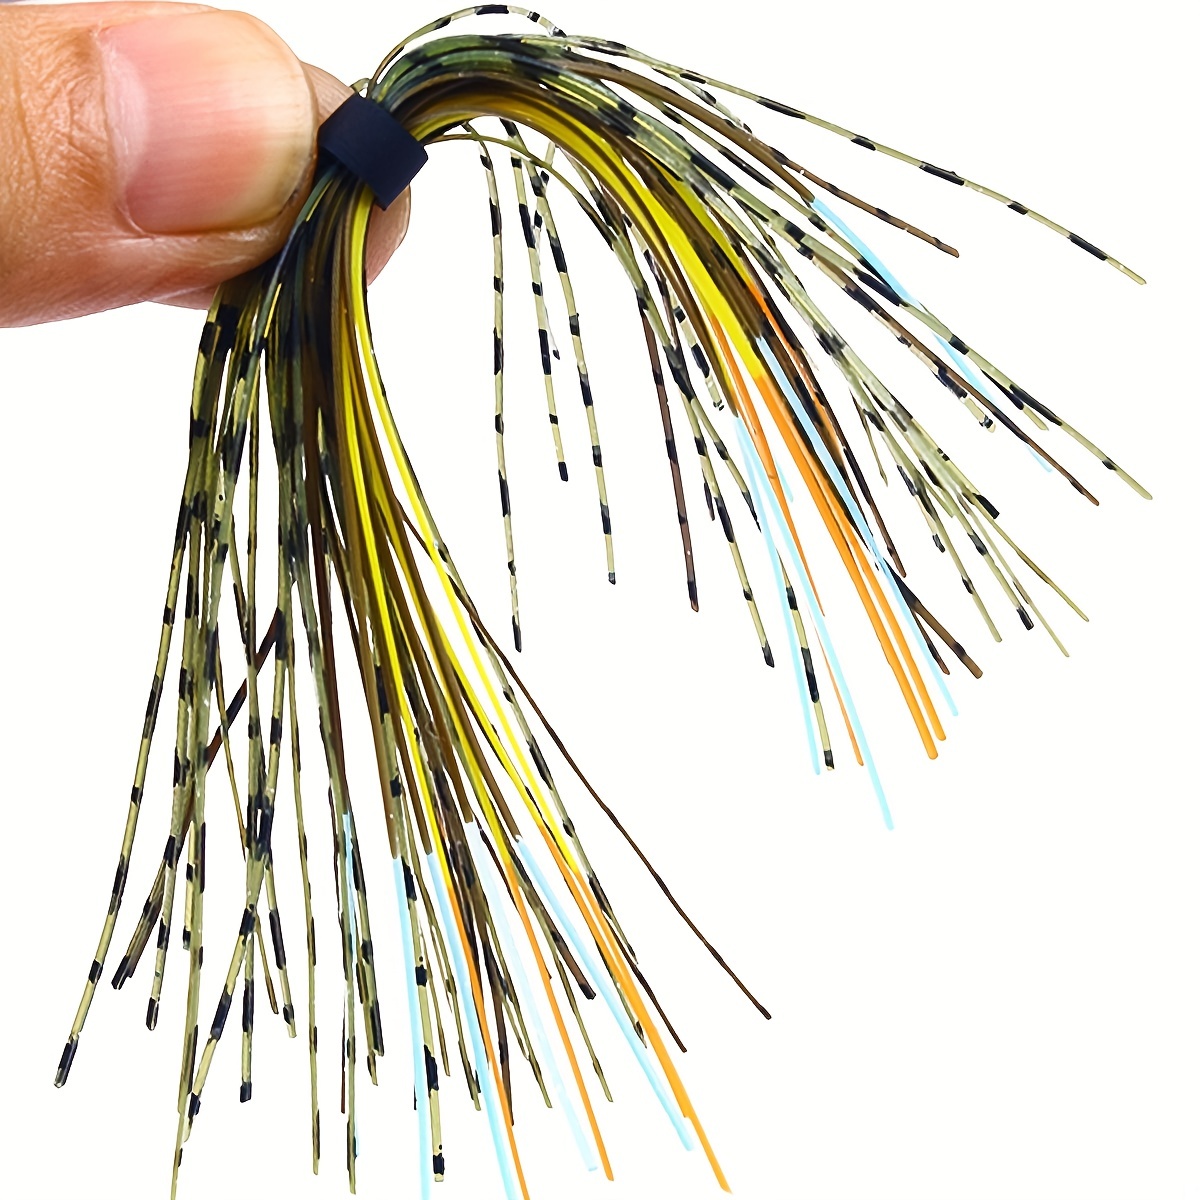 Jig Skirts Lures Kit Replacement Skirts for Spinnerbait Skirts 88 Strands Quick Change Jig Skirts Fishing Bait Accessories (6 Bundles)